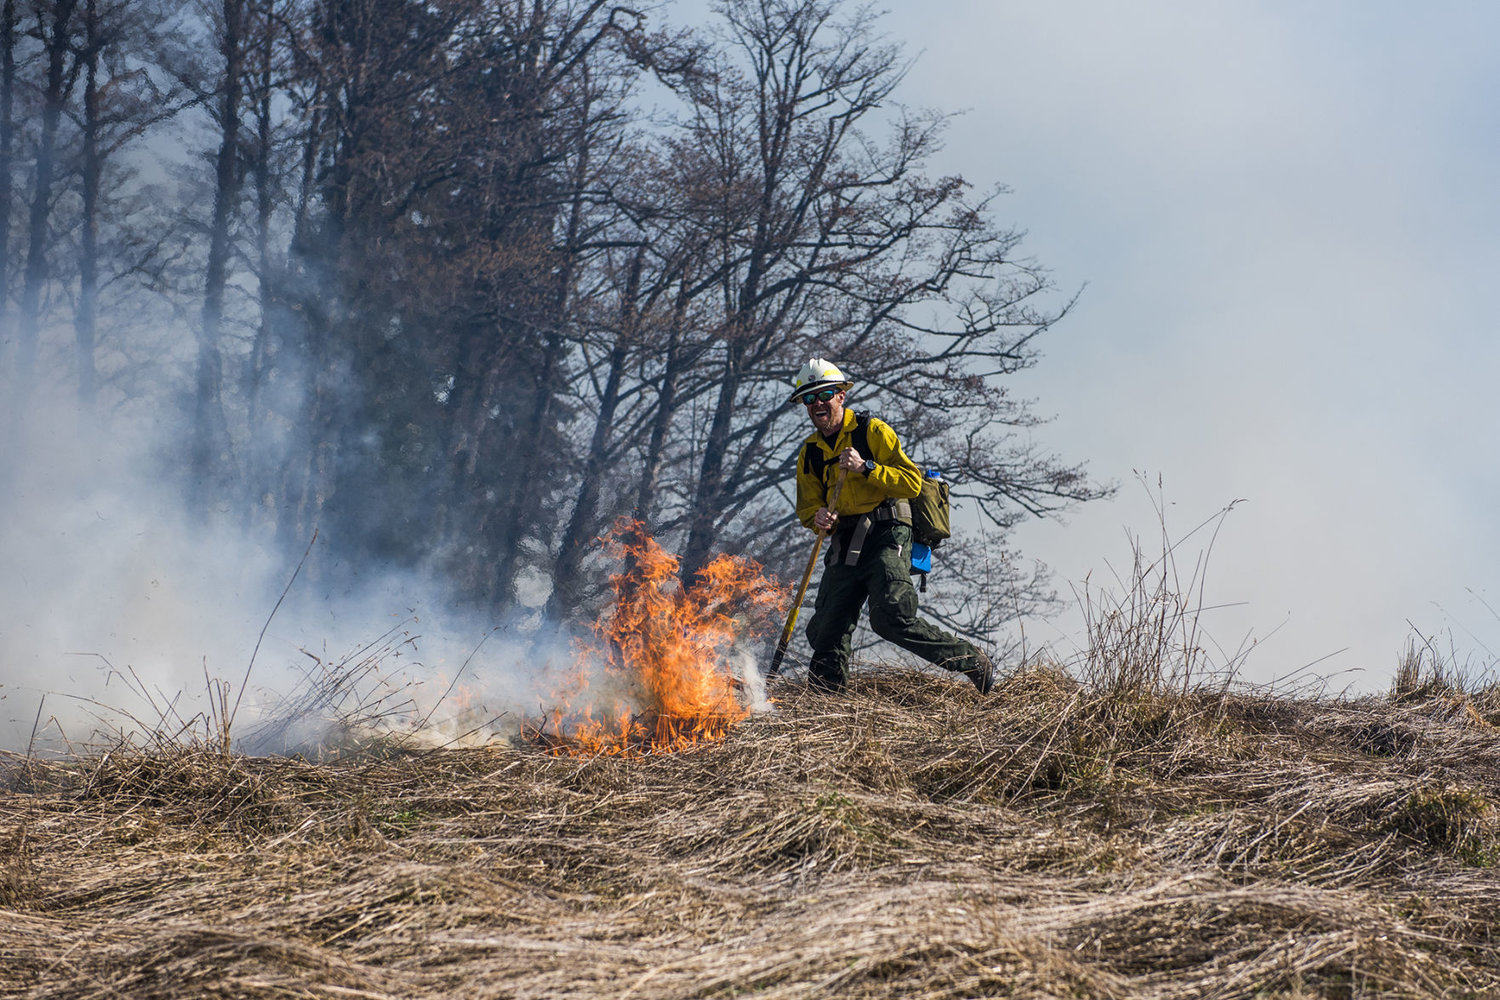 FILE PHOTO — A DNR wildlands firefighter yells to others as a flame rises through the brush near Ajlune road in 2018.